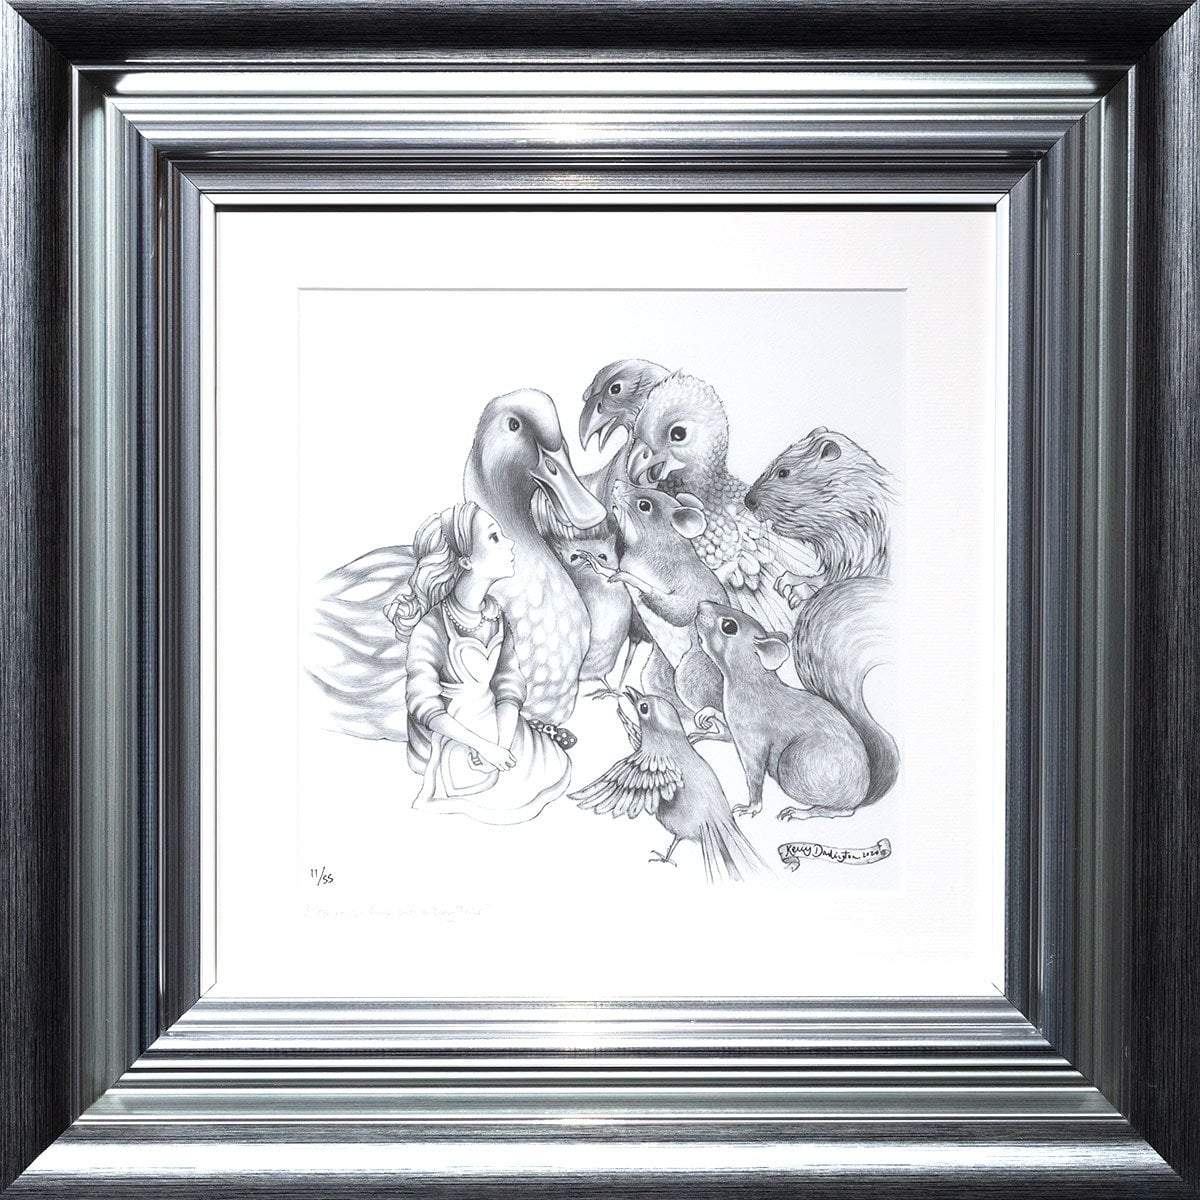 Alice Pencil Sketch Boutique Editions - non matching set of 4 - SOLD OUT